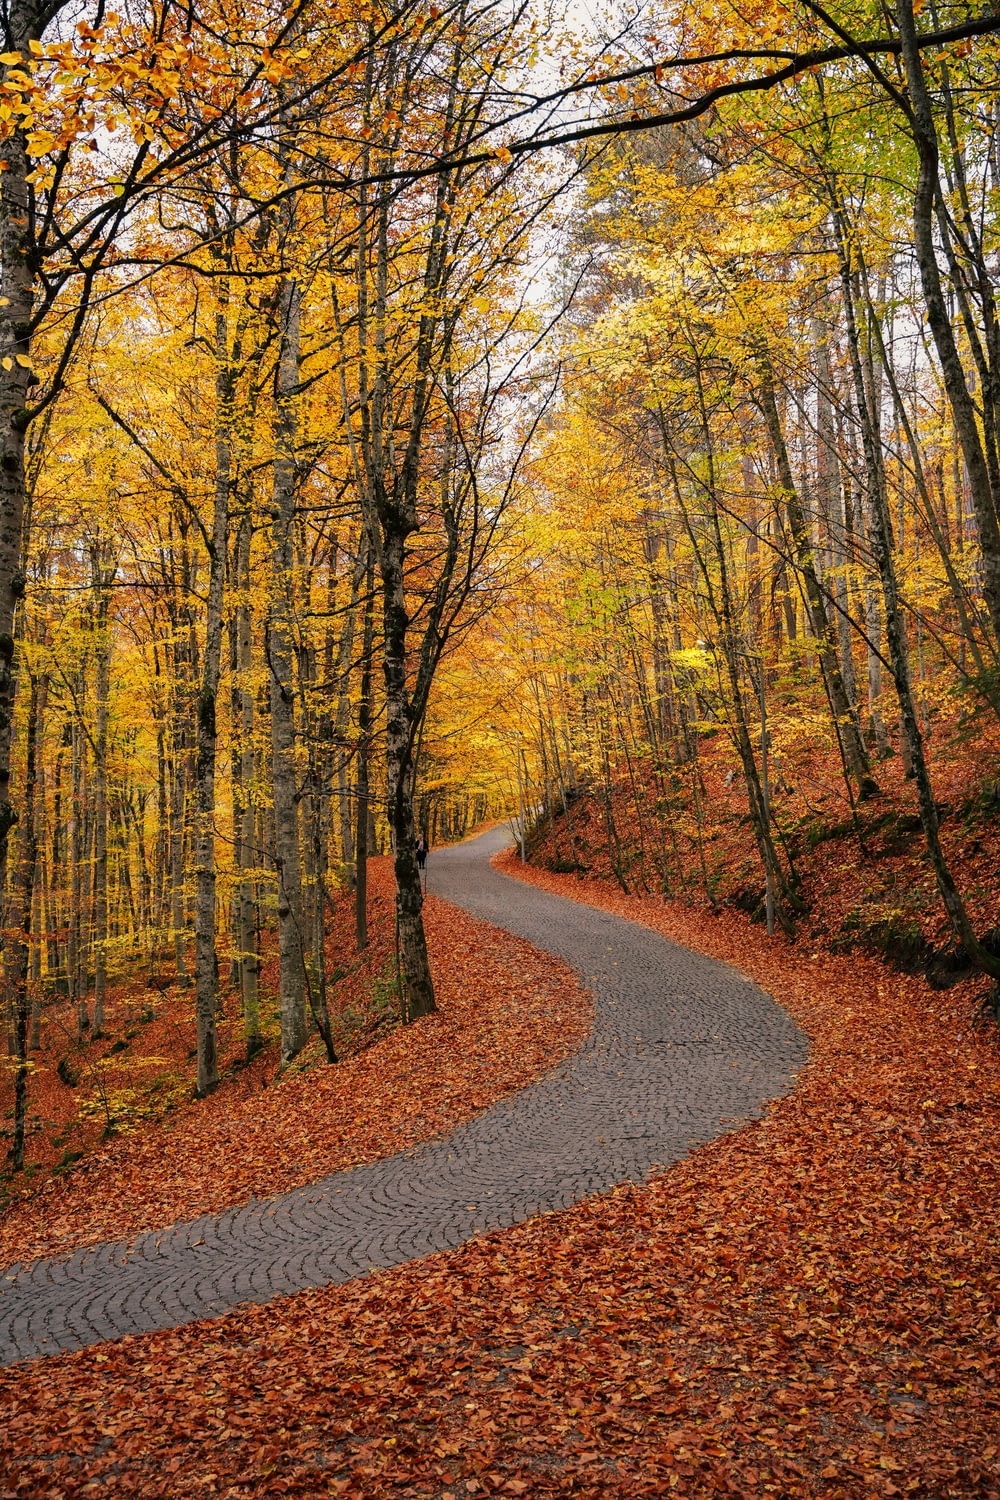 a road with yellow leaves on the sides